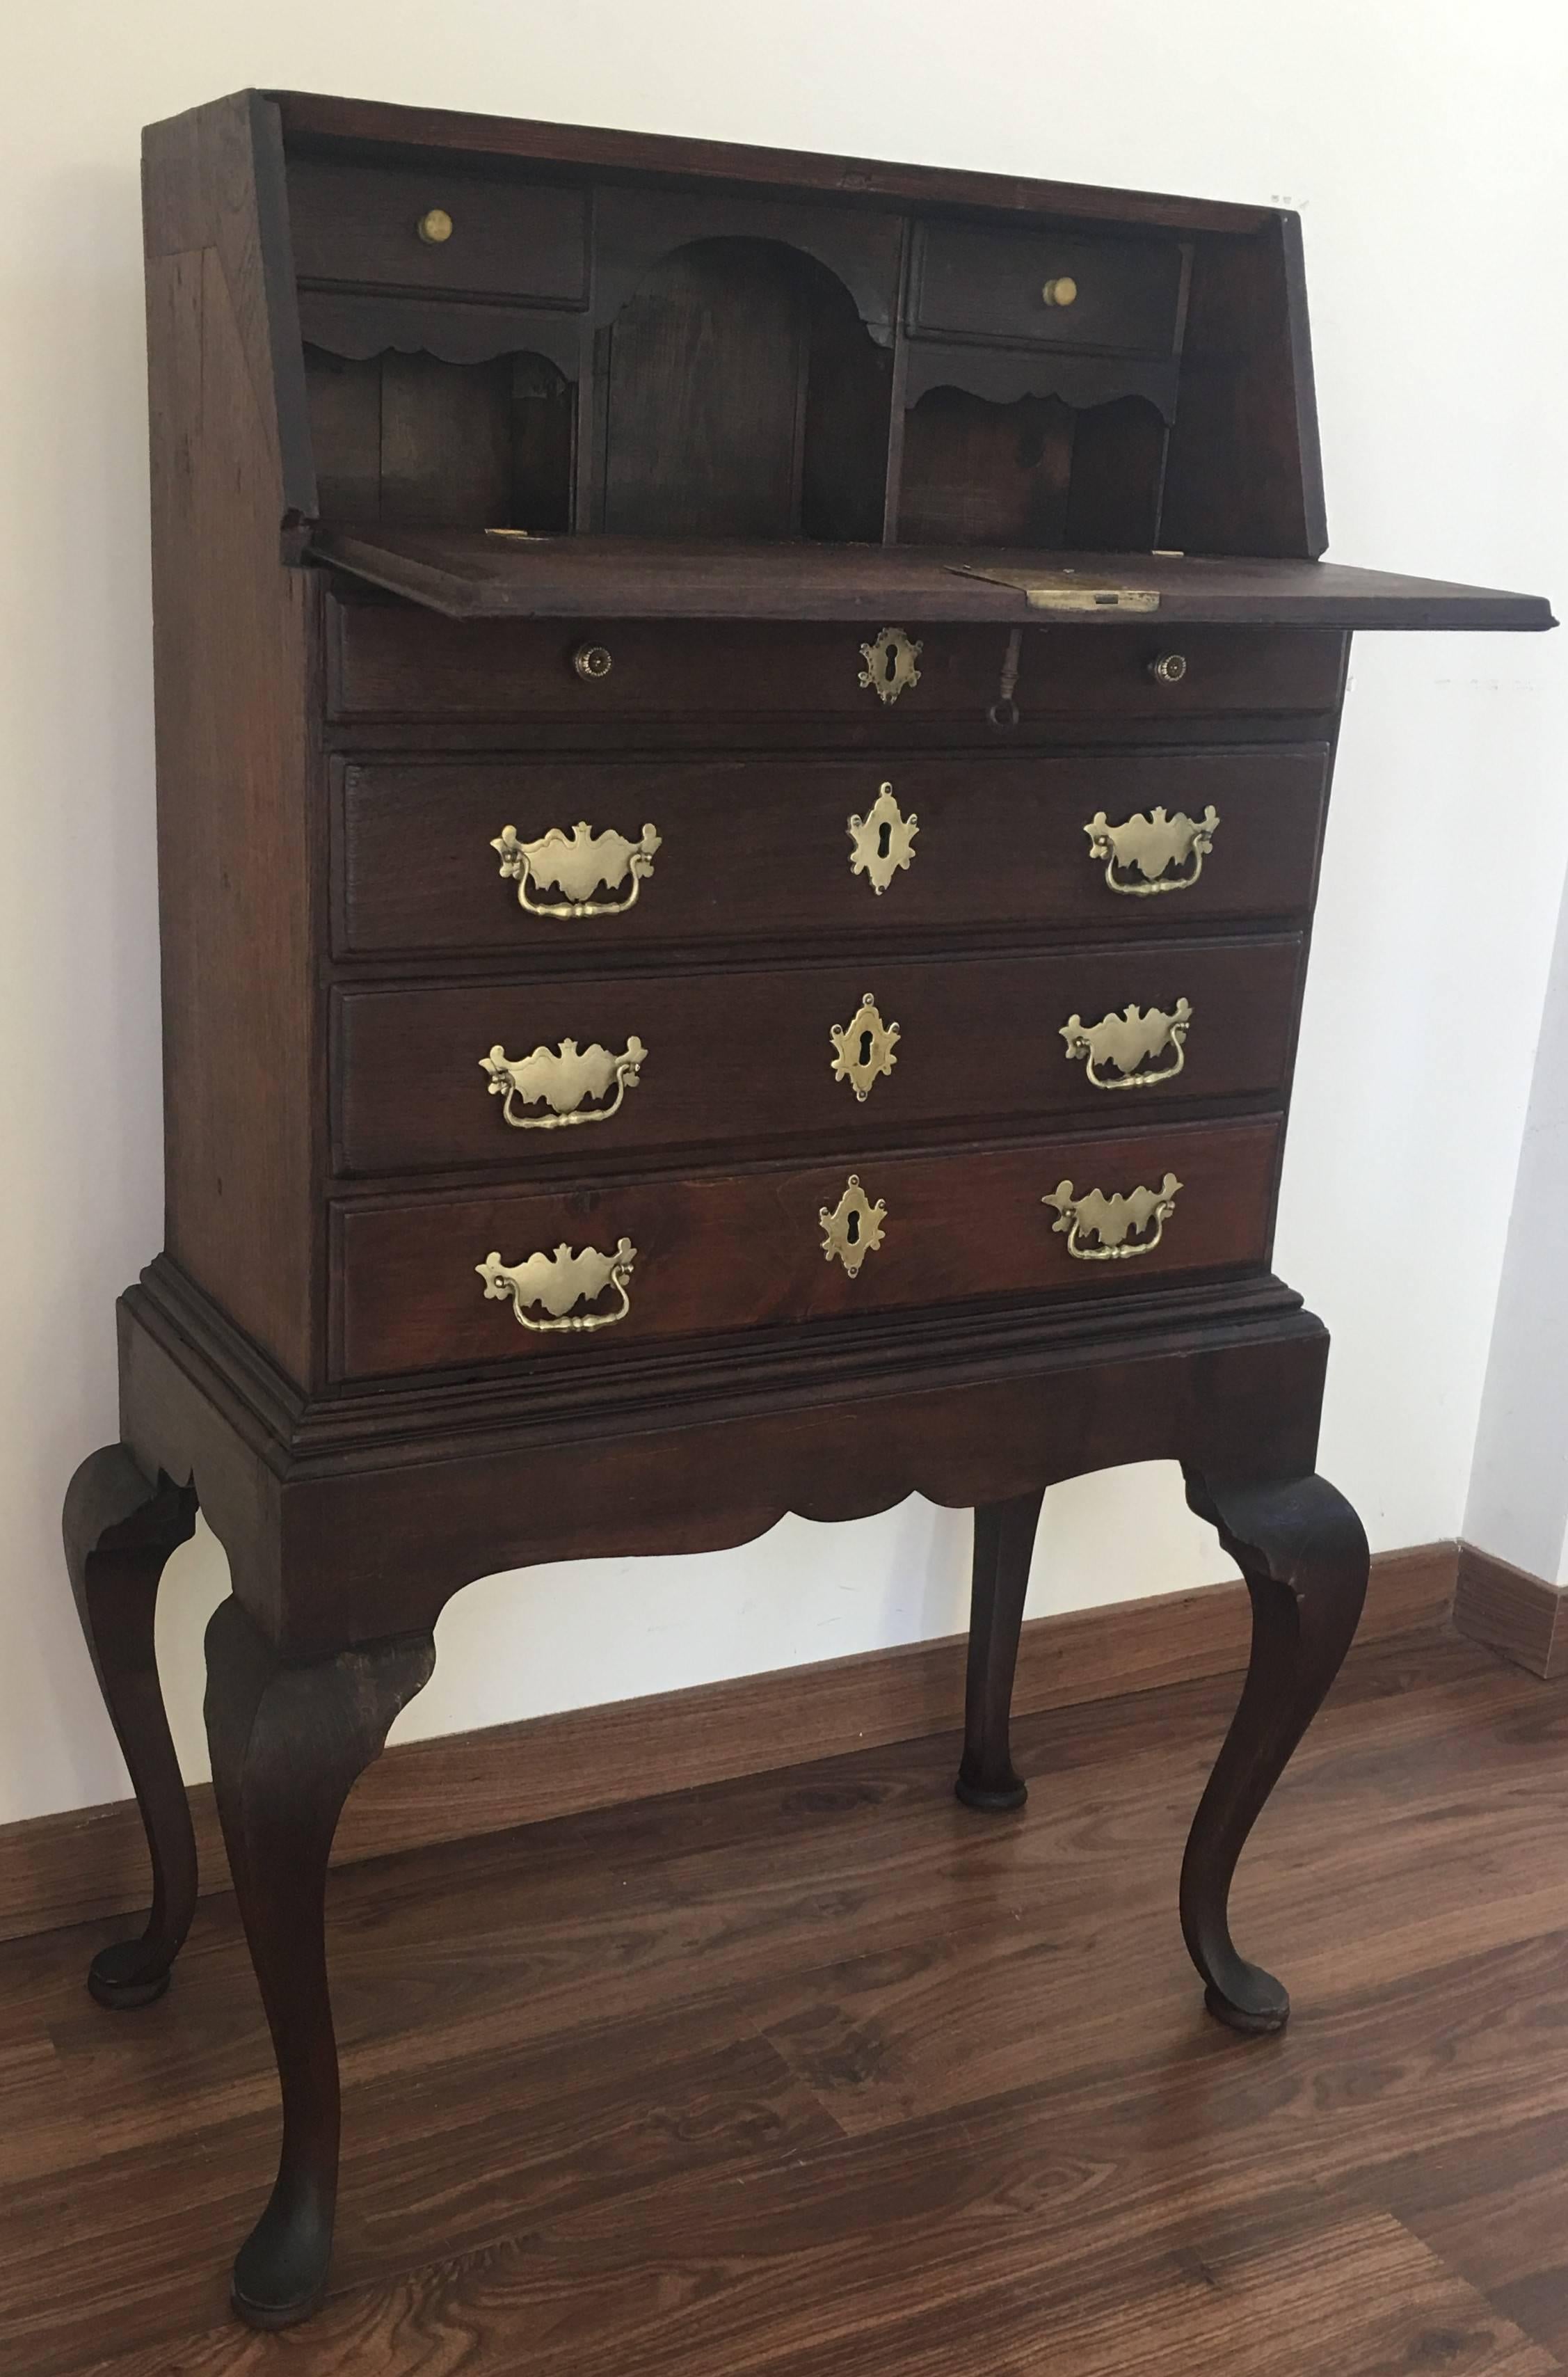 Early 19th Century Georgian Style Walnut and Burr Secretary Desk or Vanity In Good Condition For Sale In Miami, FL